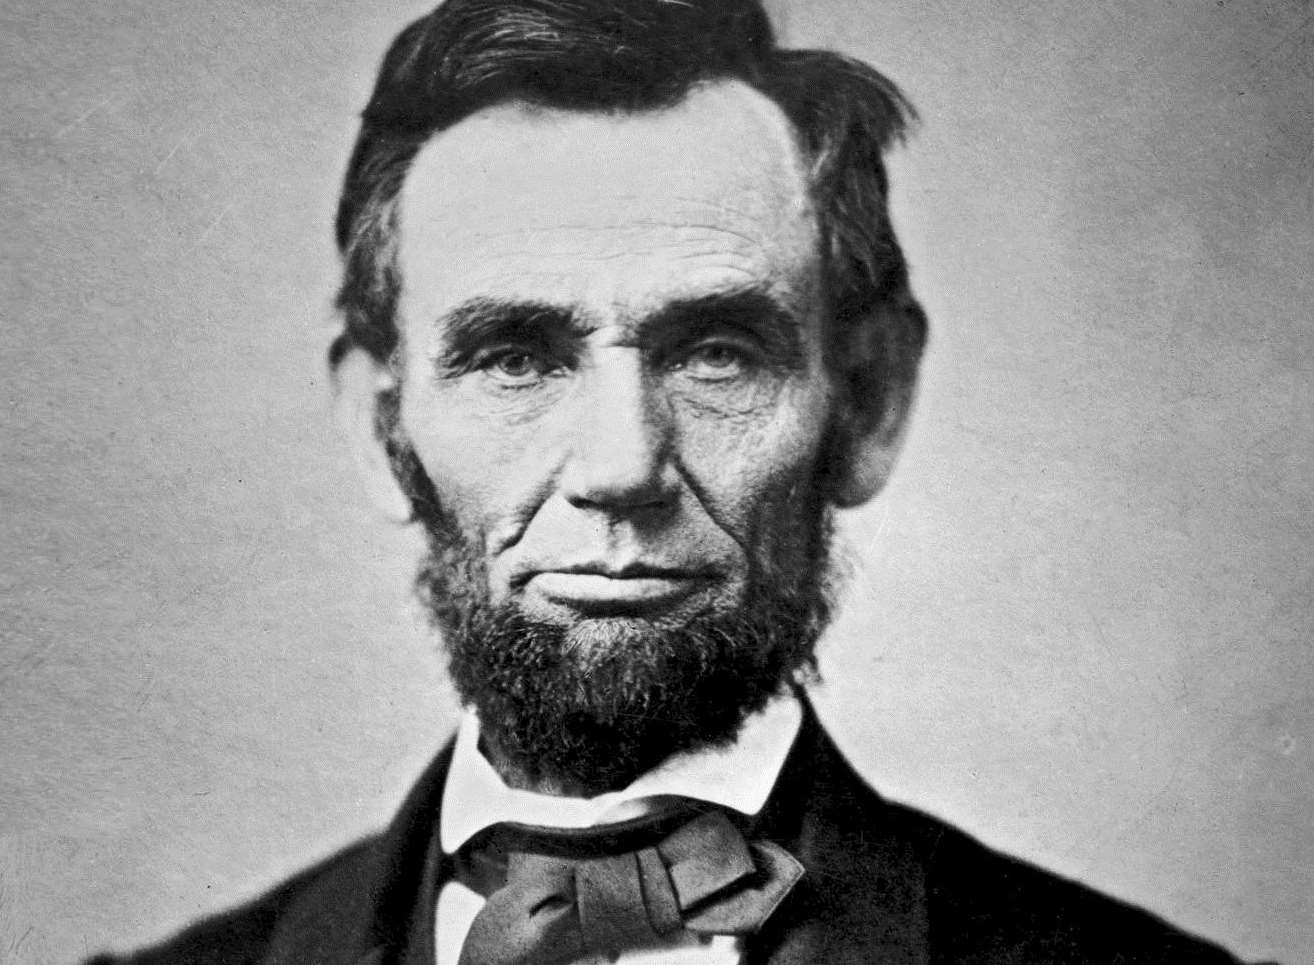 Abraham Lincoln was assassinated by John Wilkes Booth in 1865